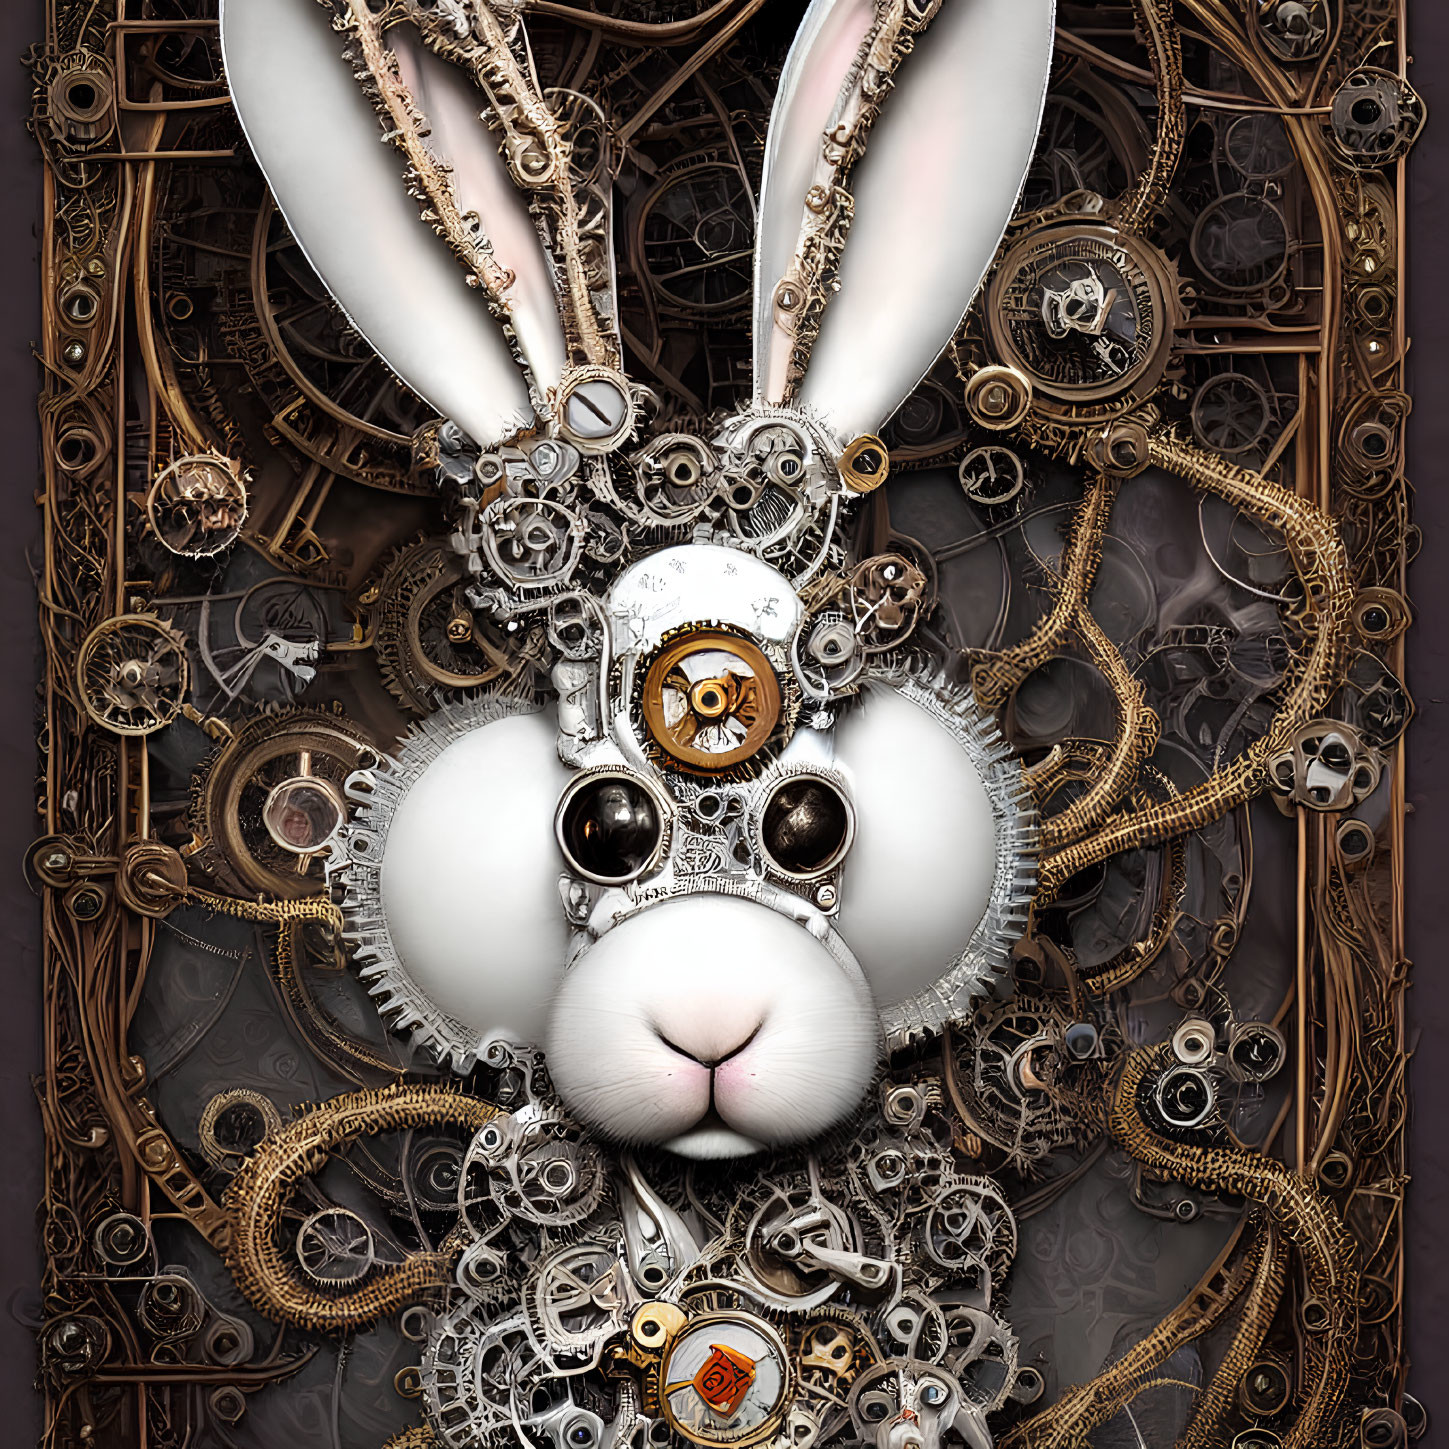 Steampunk-style bunny illustration with clock face and mechanical parts